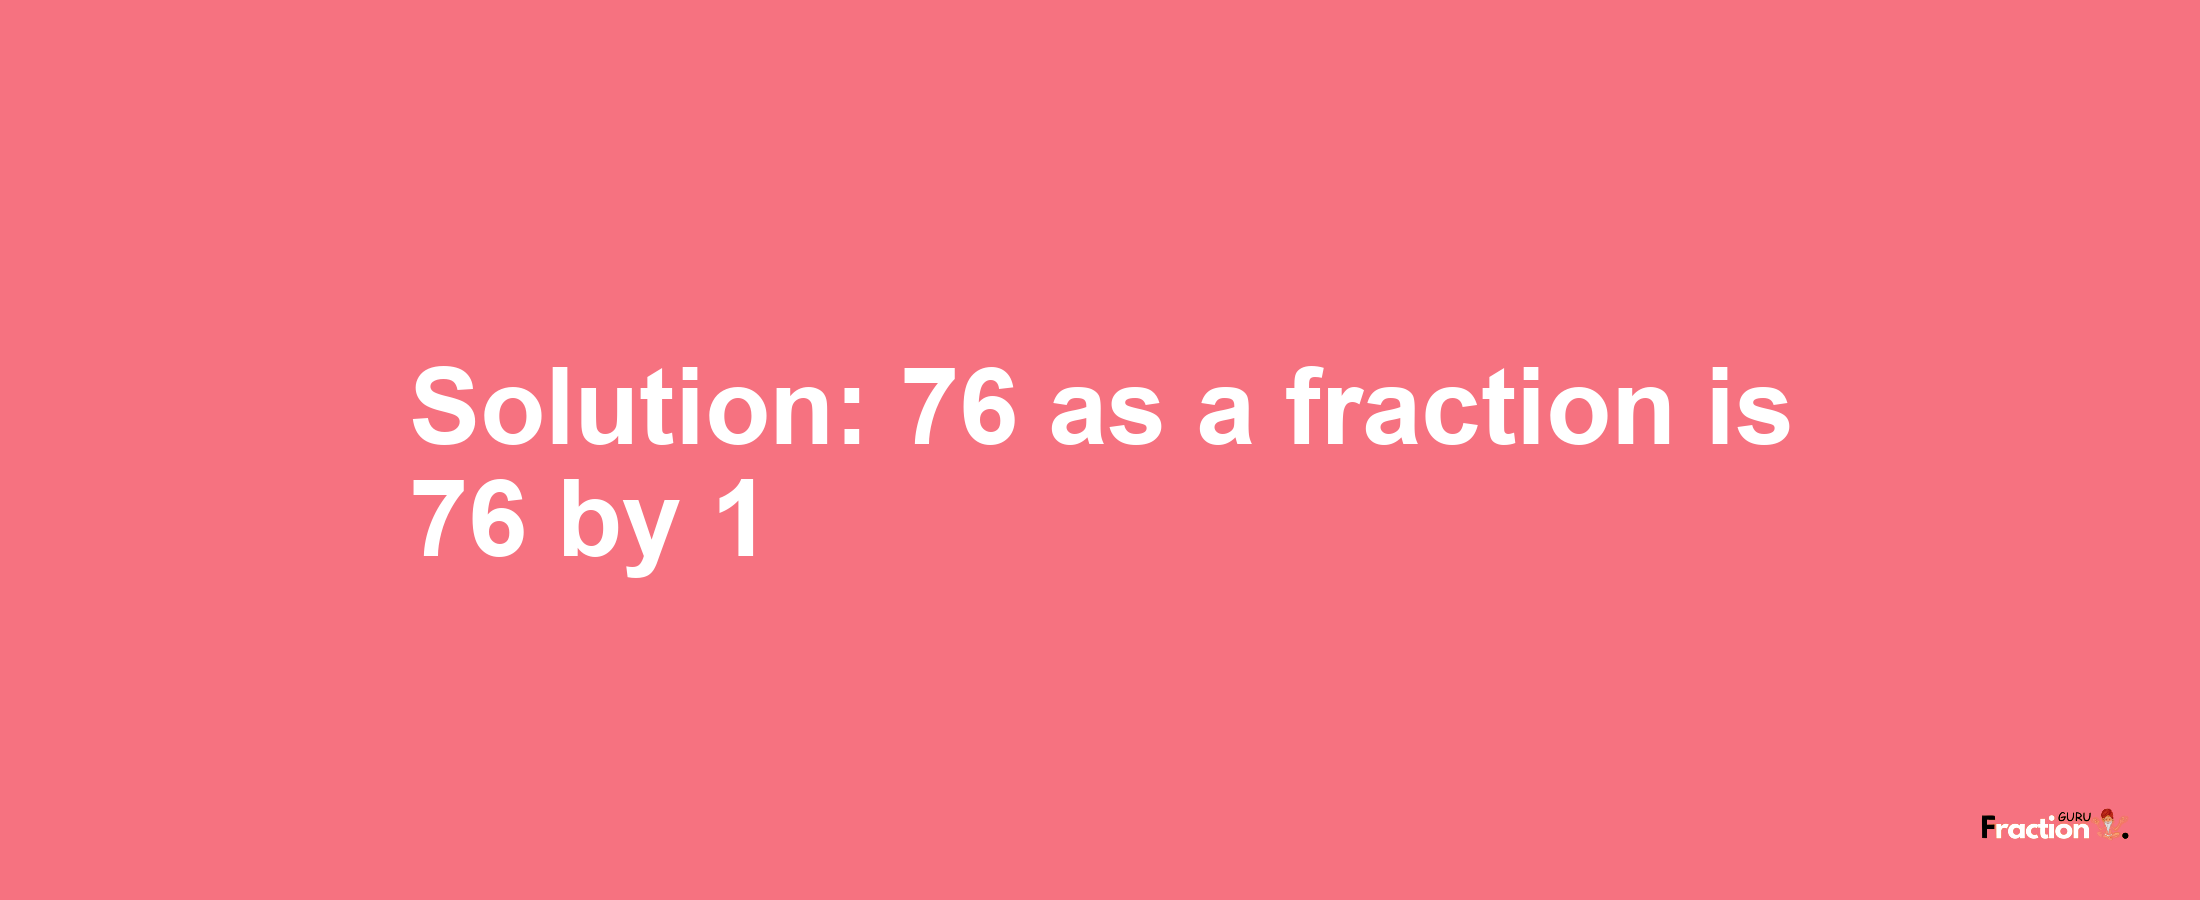 Solution:76 as a fraction is 76/1